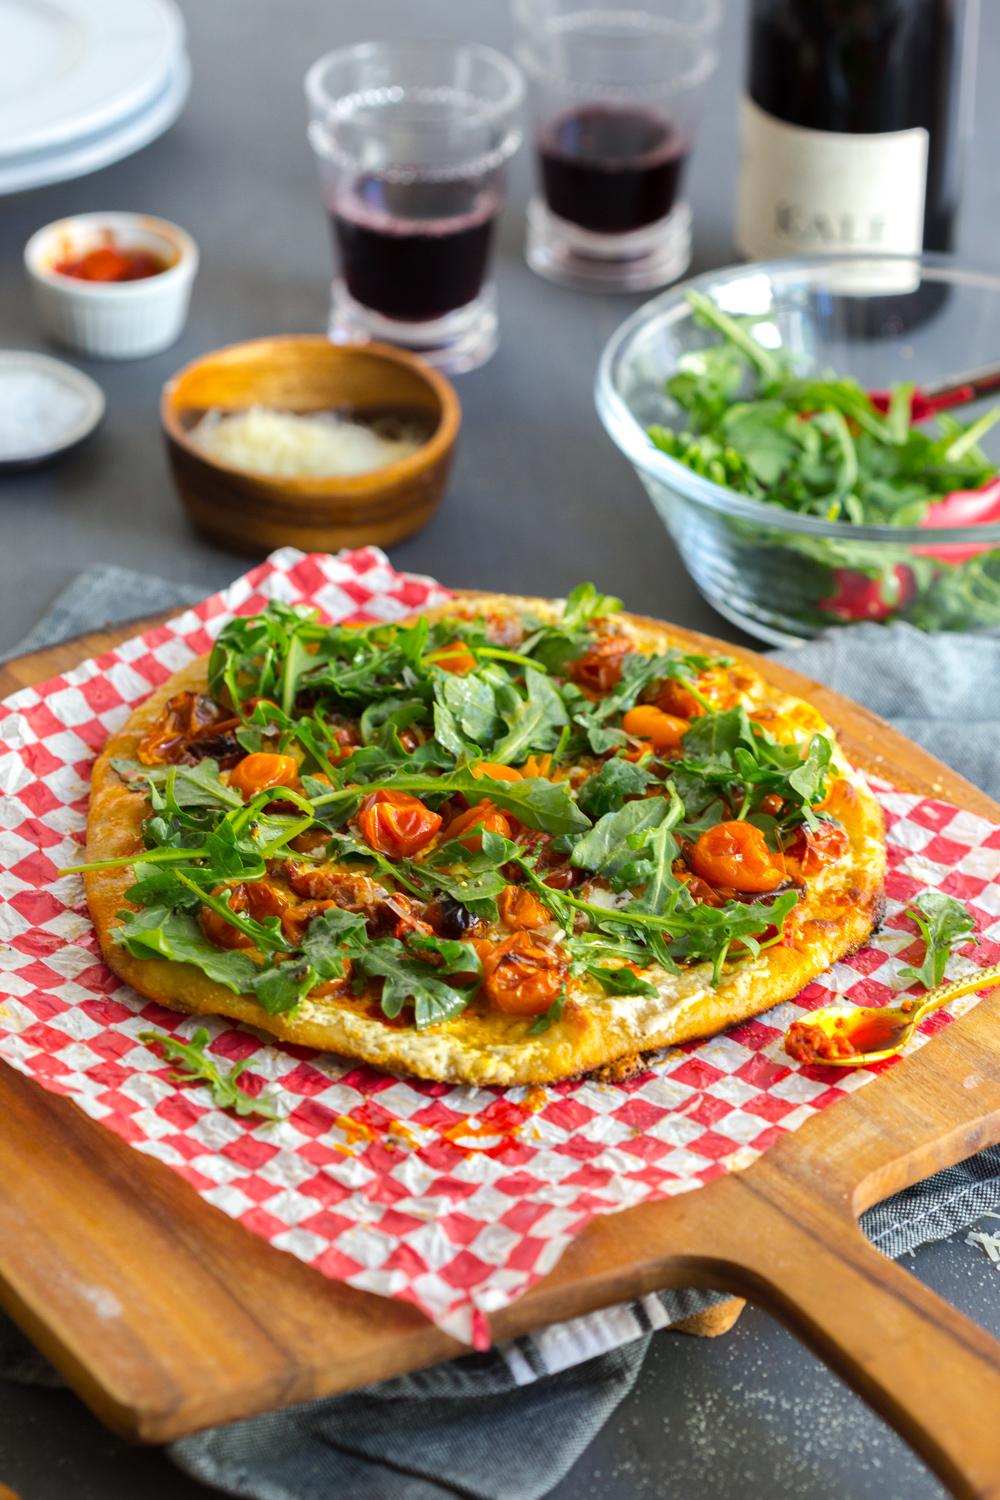 This Tomato Confit Burrata and Arugula Pizza is best served with a bottle of red, I love it with my red blend by Kale Wines.